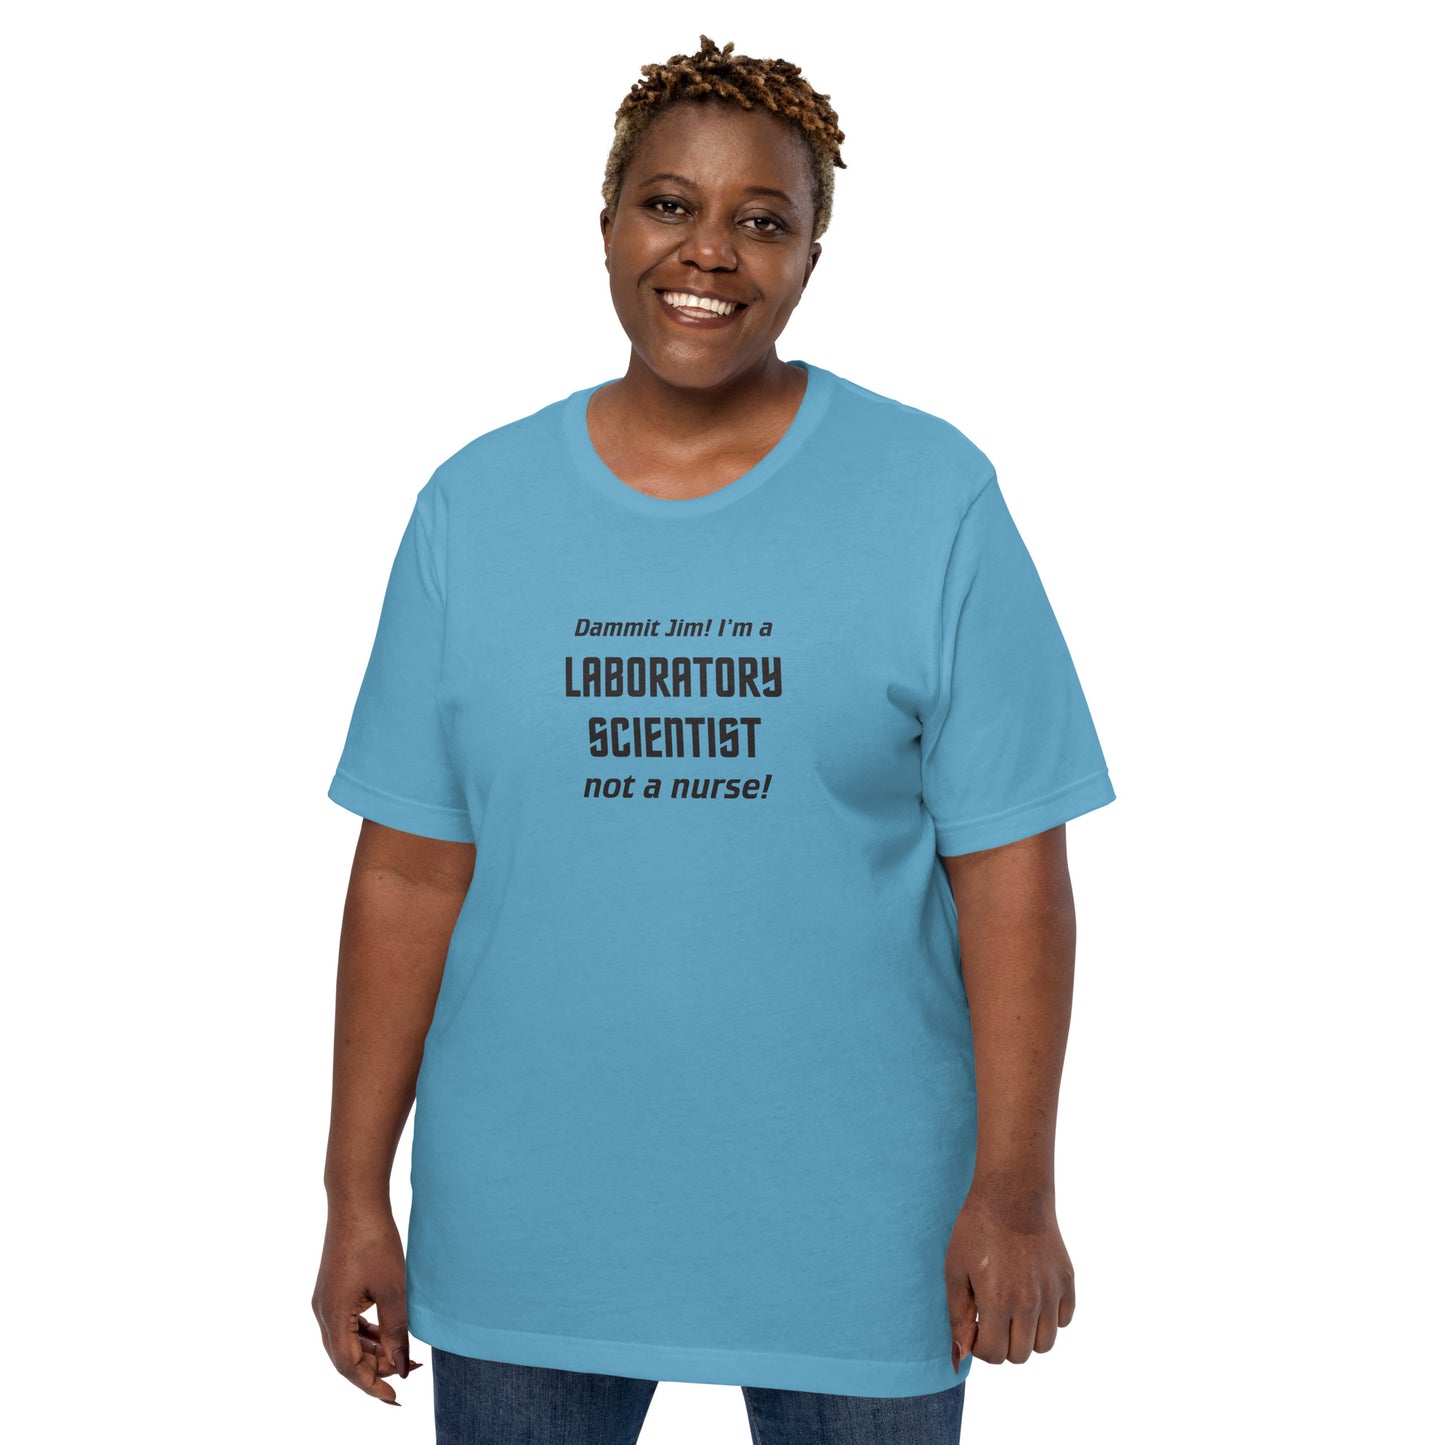 Model wearing Ocean Blue t-shirt with text graphic in Star Trek font: "Dammit Jim! I'm a LABORATORY SCIENTIST not a nurse!"